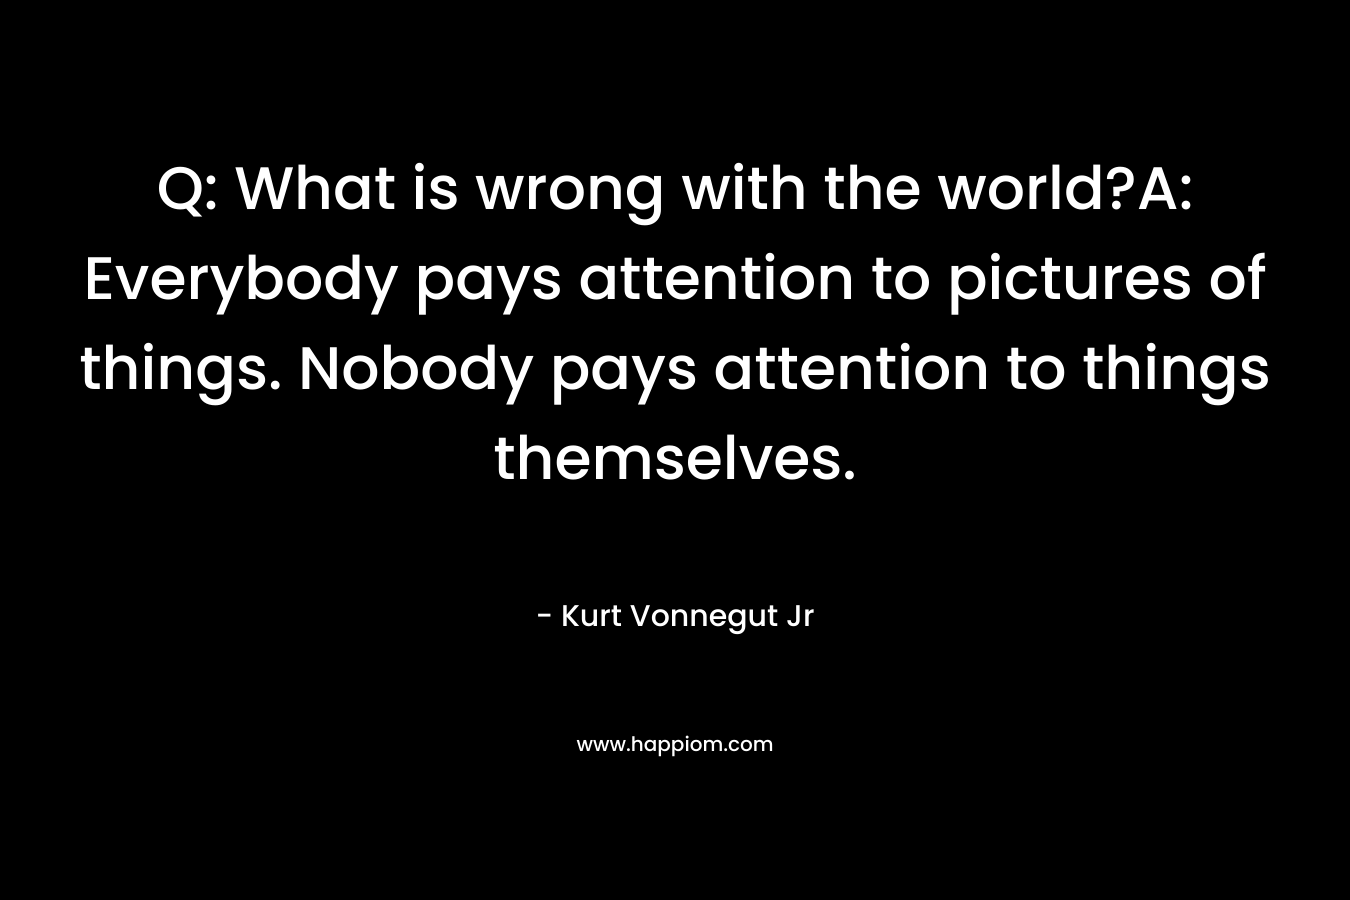 Q: What is wrong with the world?A: Everybody pays attention to pictures of things. Nobody pays attention to things themselves.